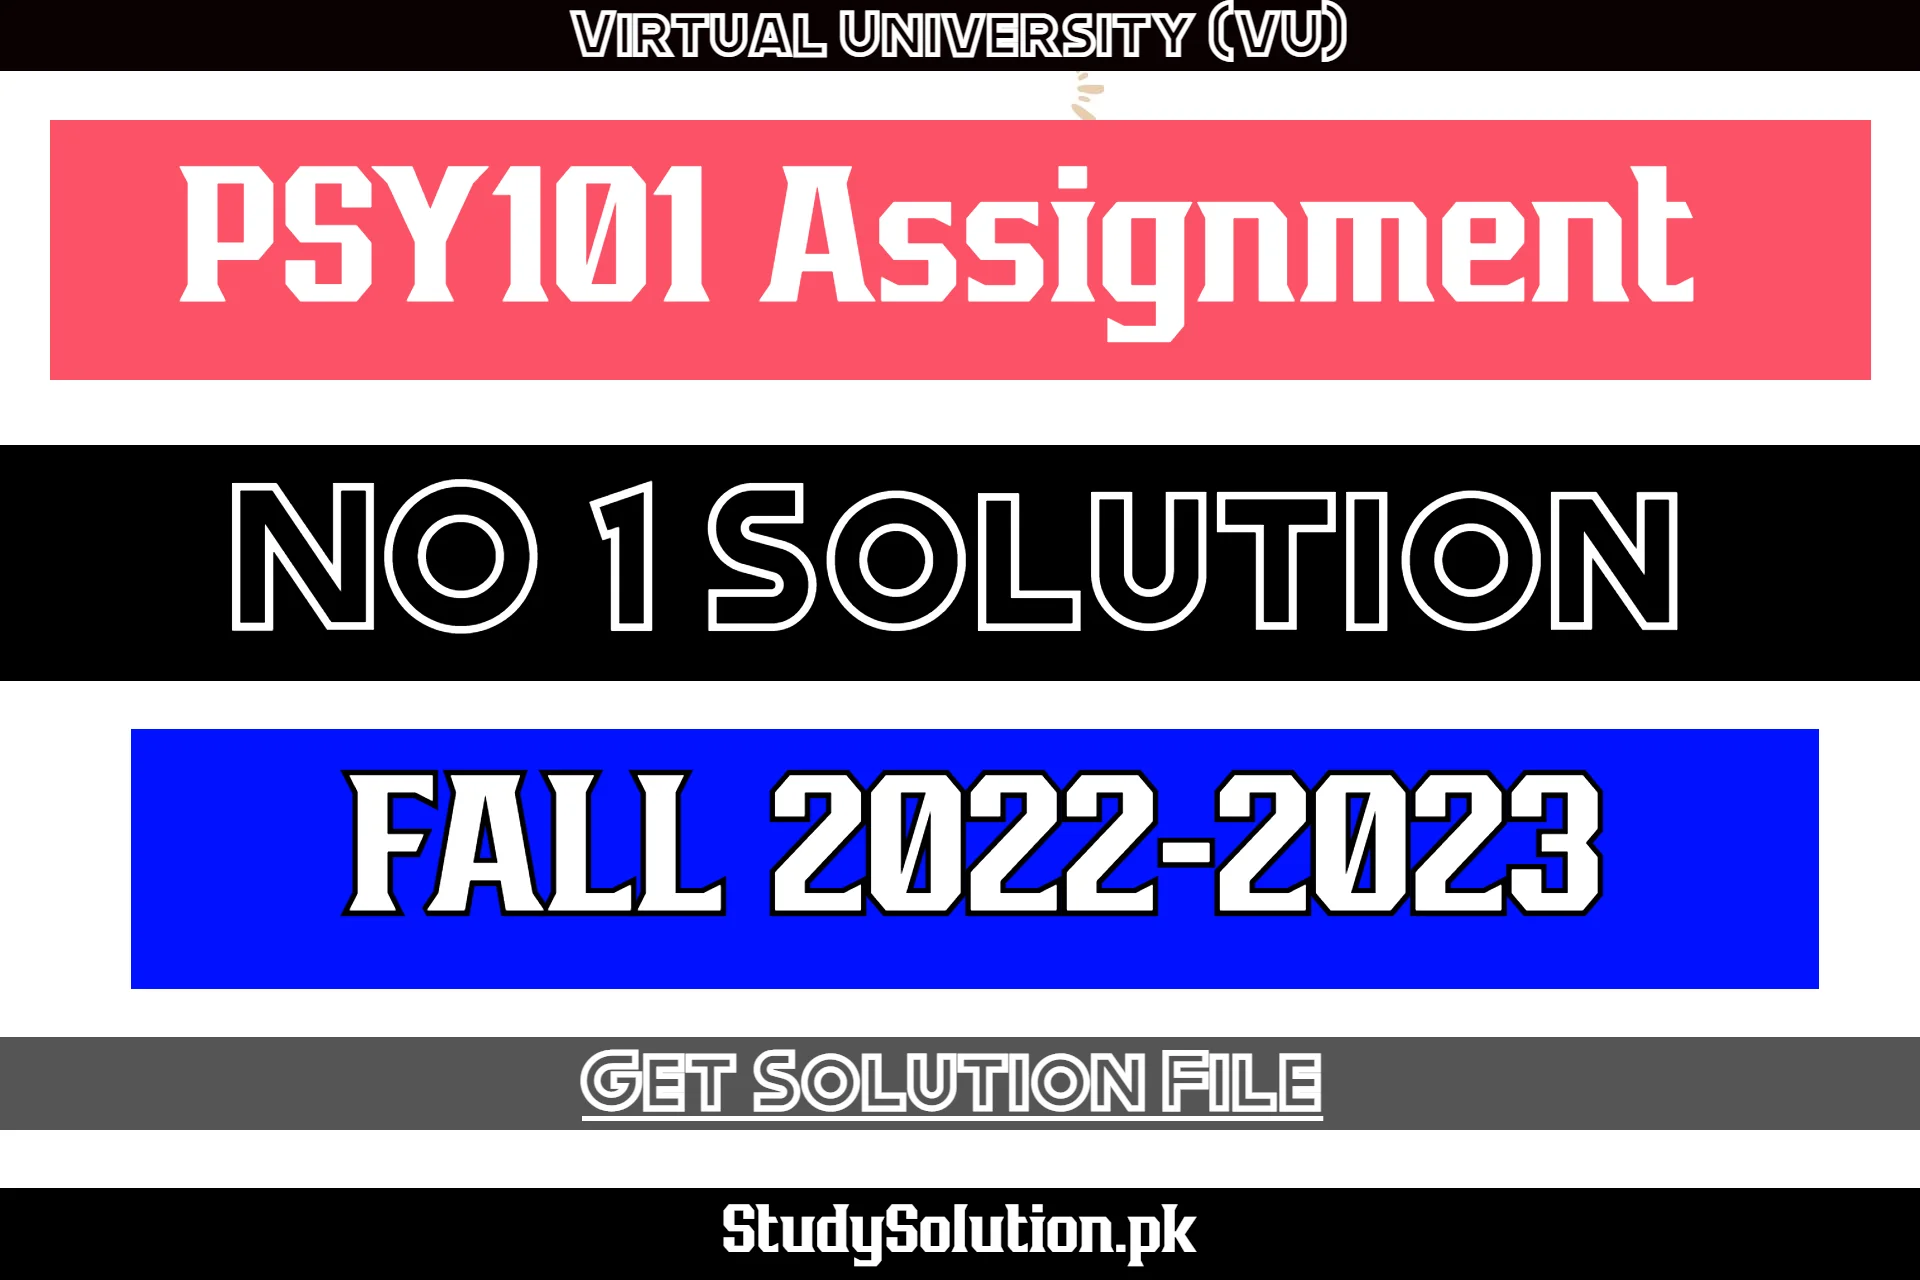 PSY101 Assignment No 1 Solution Fall 2022